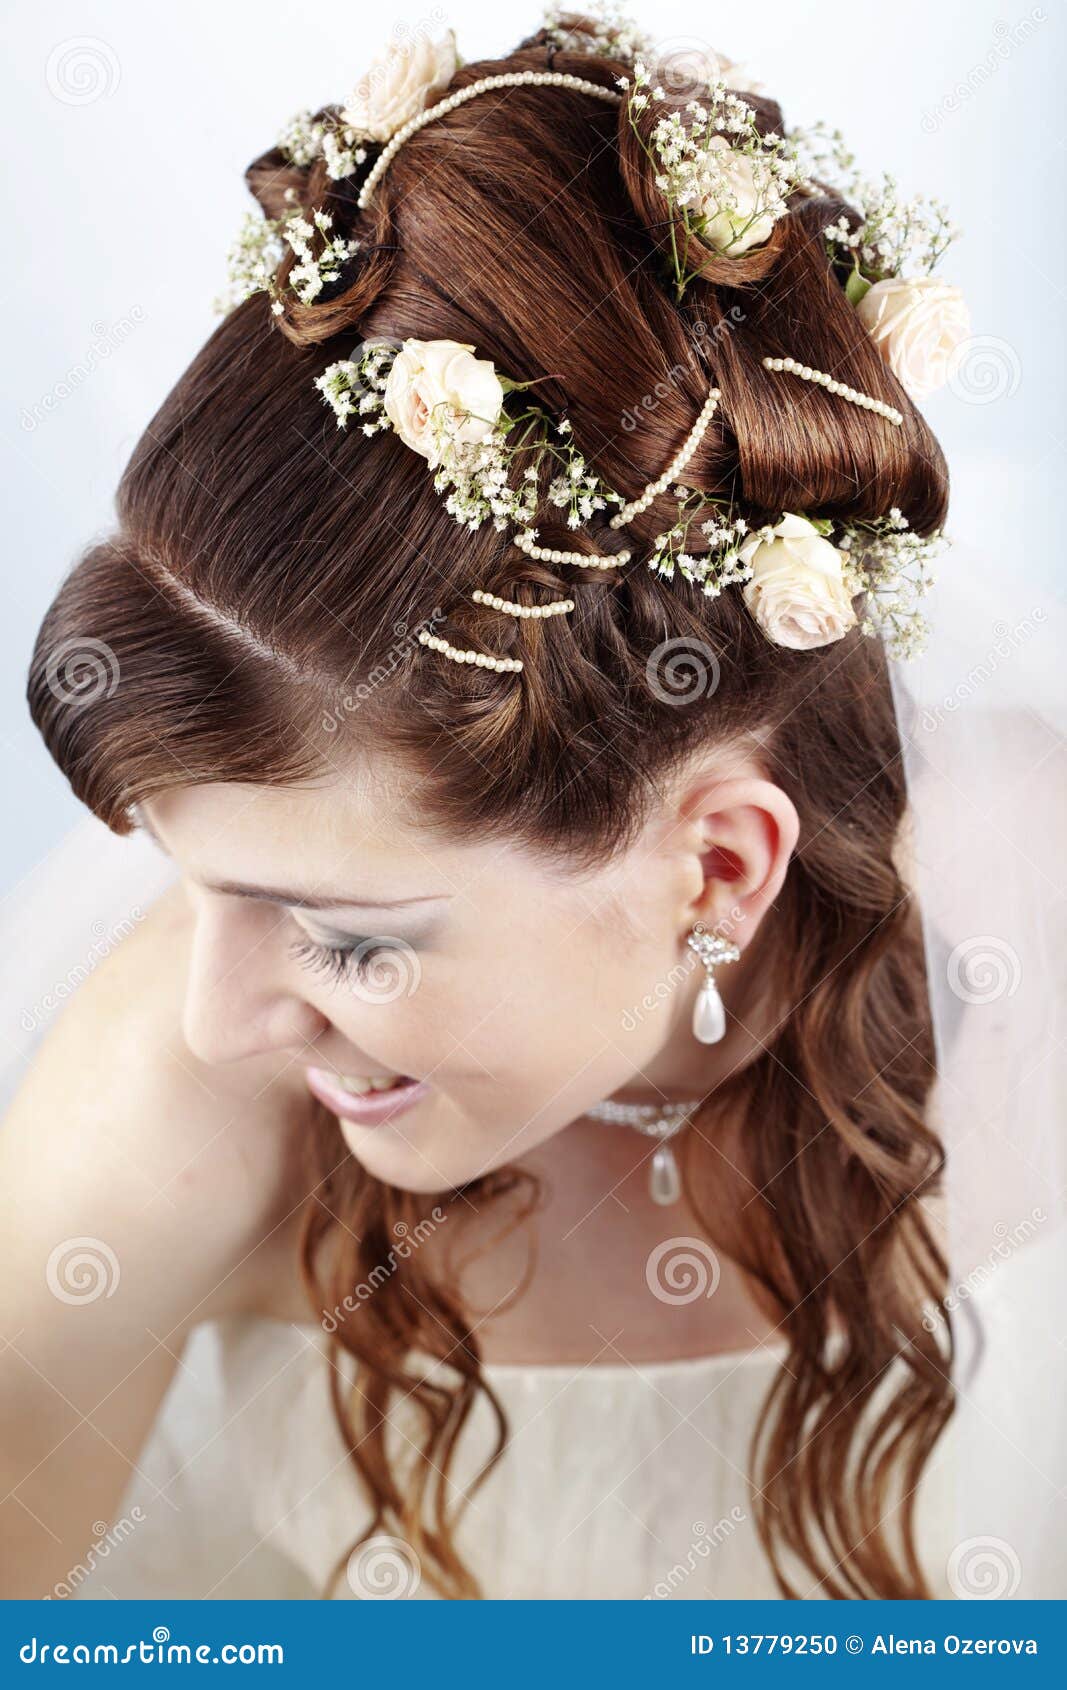 hair style for bridal